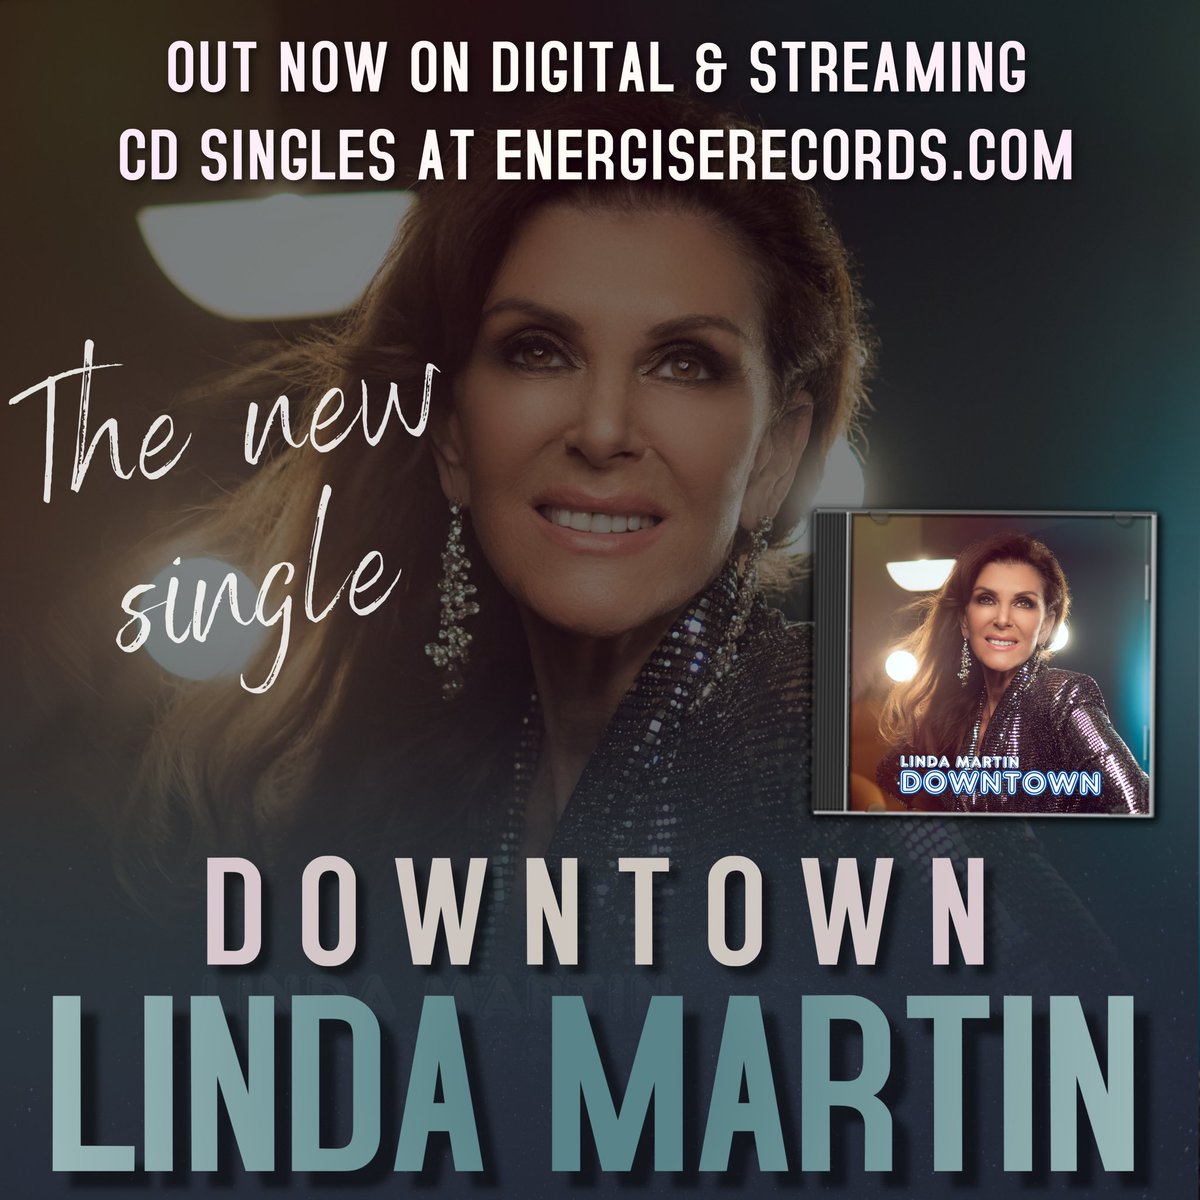 Eurovision winner Linda Martin released her stunning rendition of the classic Downtown a few weeks back - it’s available globally to download and stream, with CDs available direct from energiserecords.com #eurovision #lindamartin #ireland #pop #downtown #popmusic #dancefloor